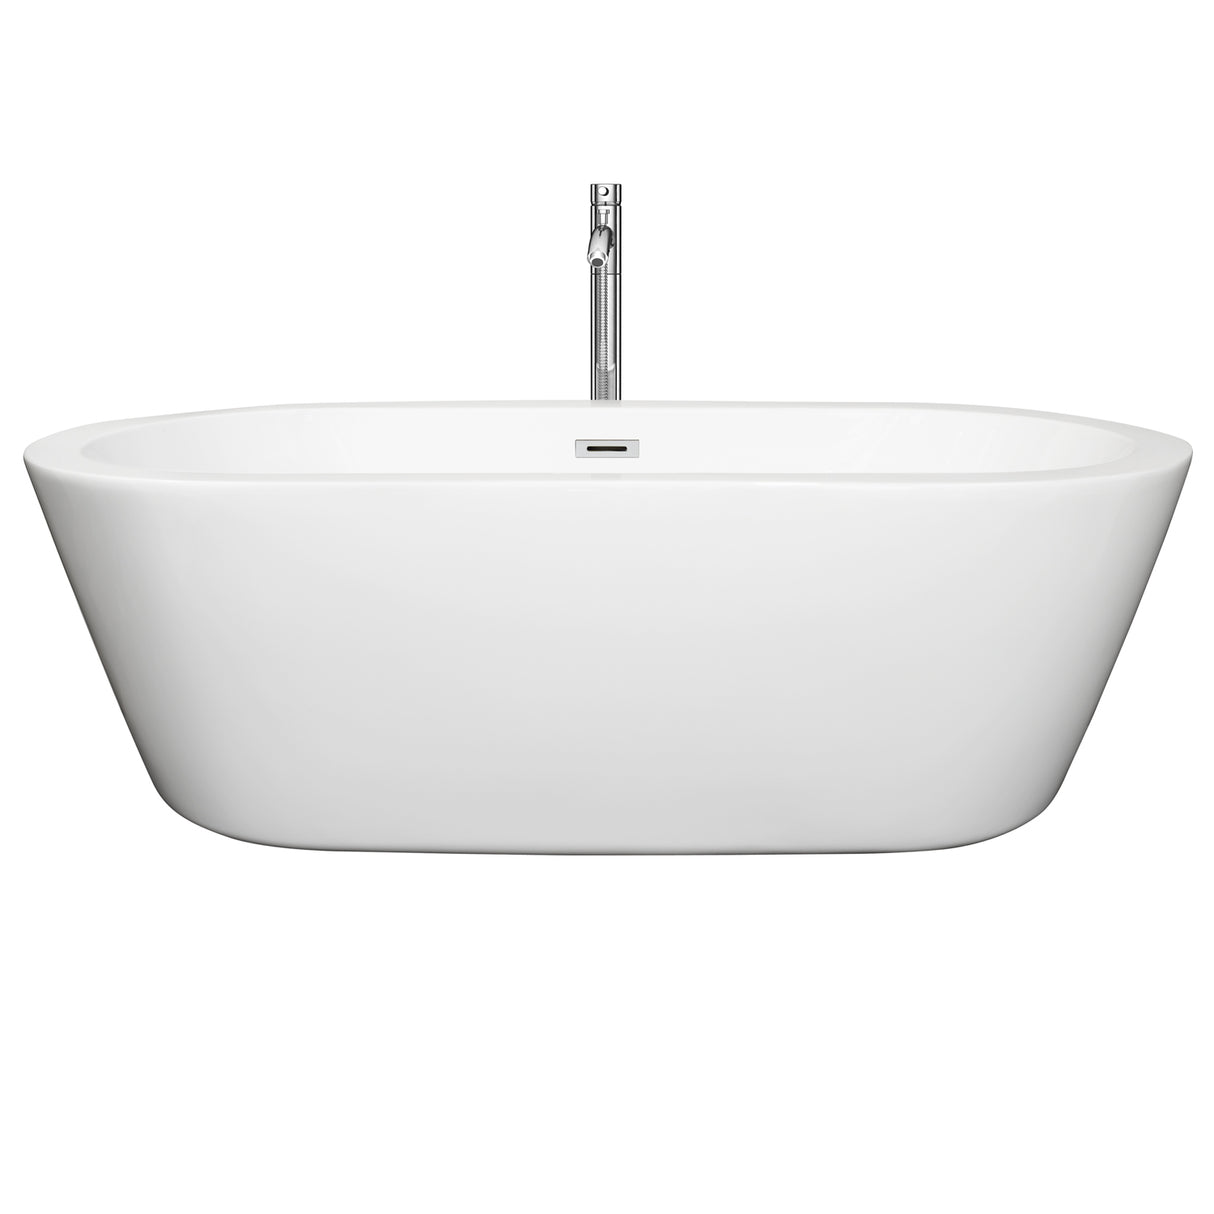 Mermaid 71 Inch Freestanding Bathtub in White with Floor Mounted Faucet Drain and Overflow Trim in Polished Chrome